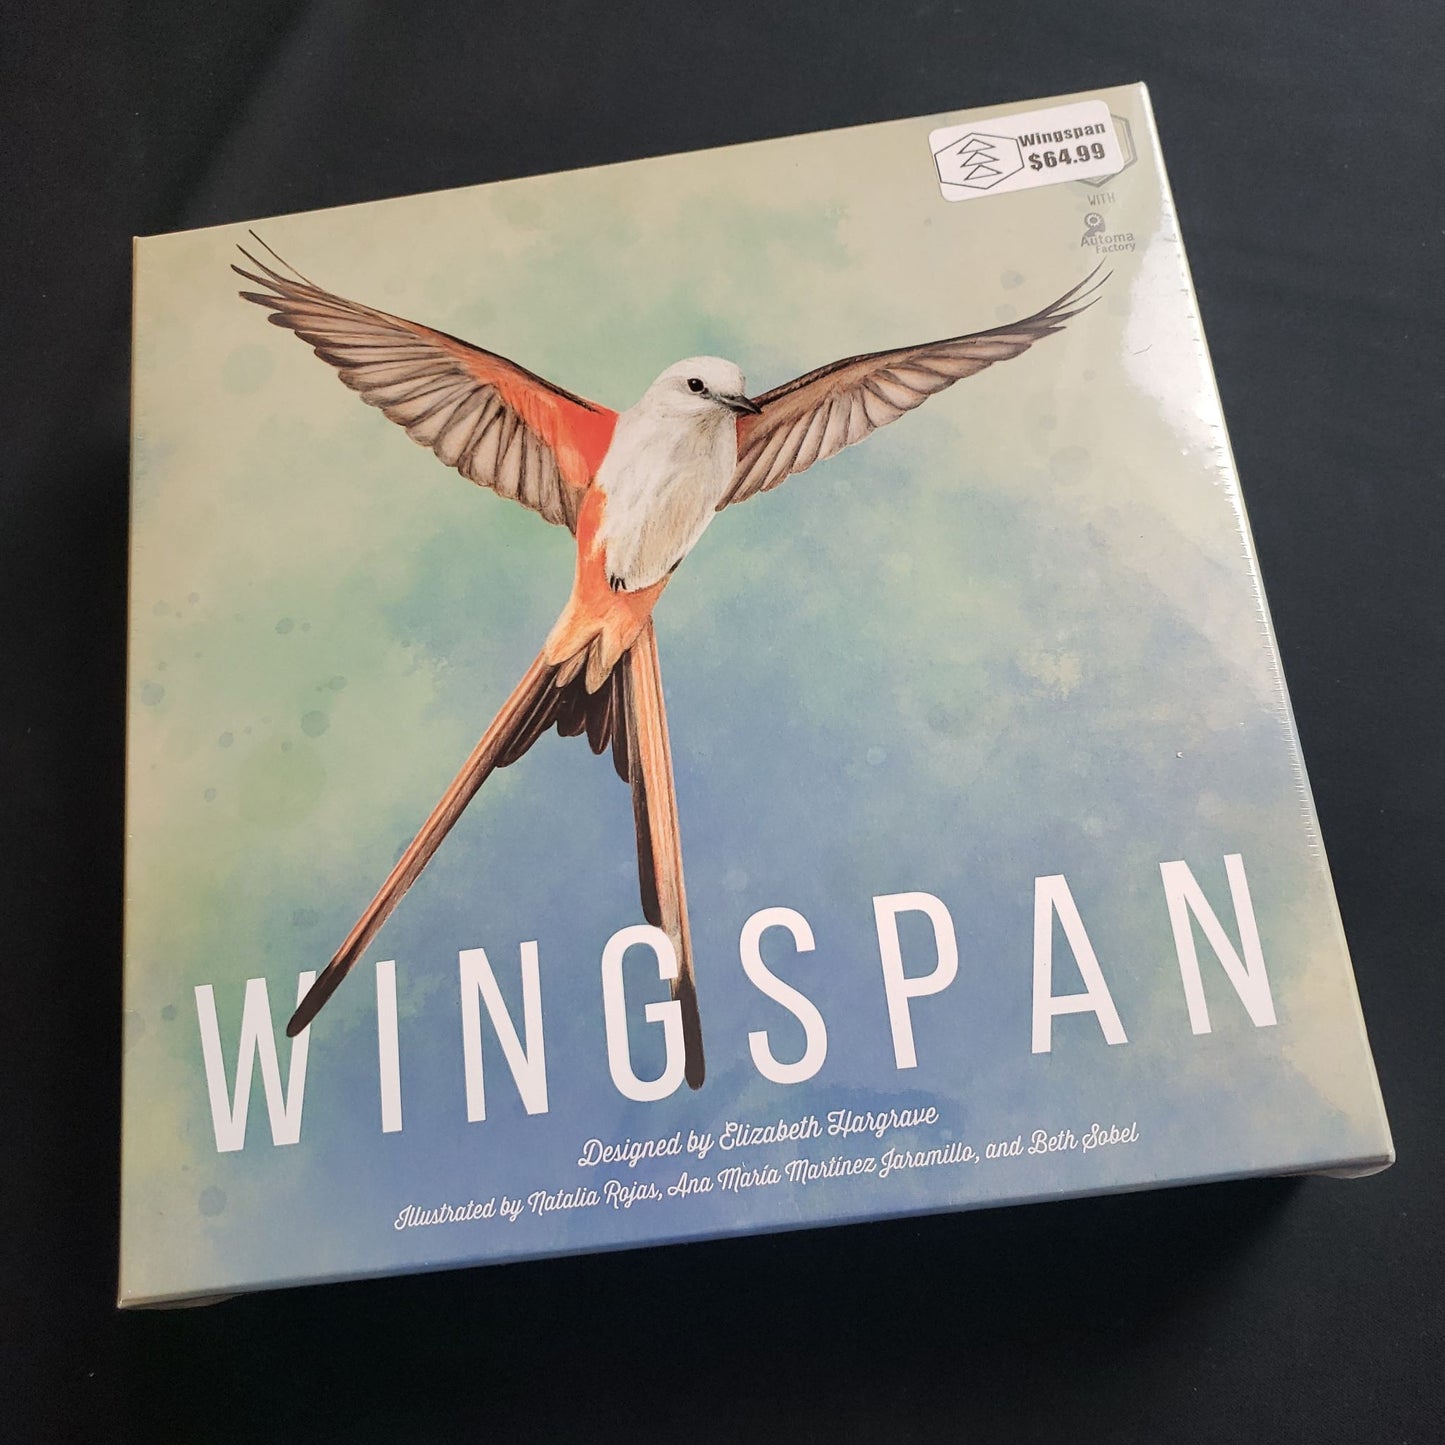 Wingspan board game - front cover of box